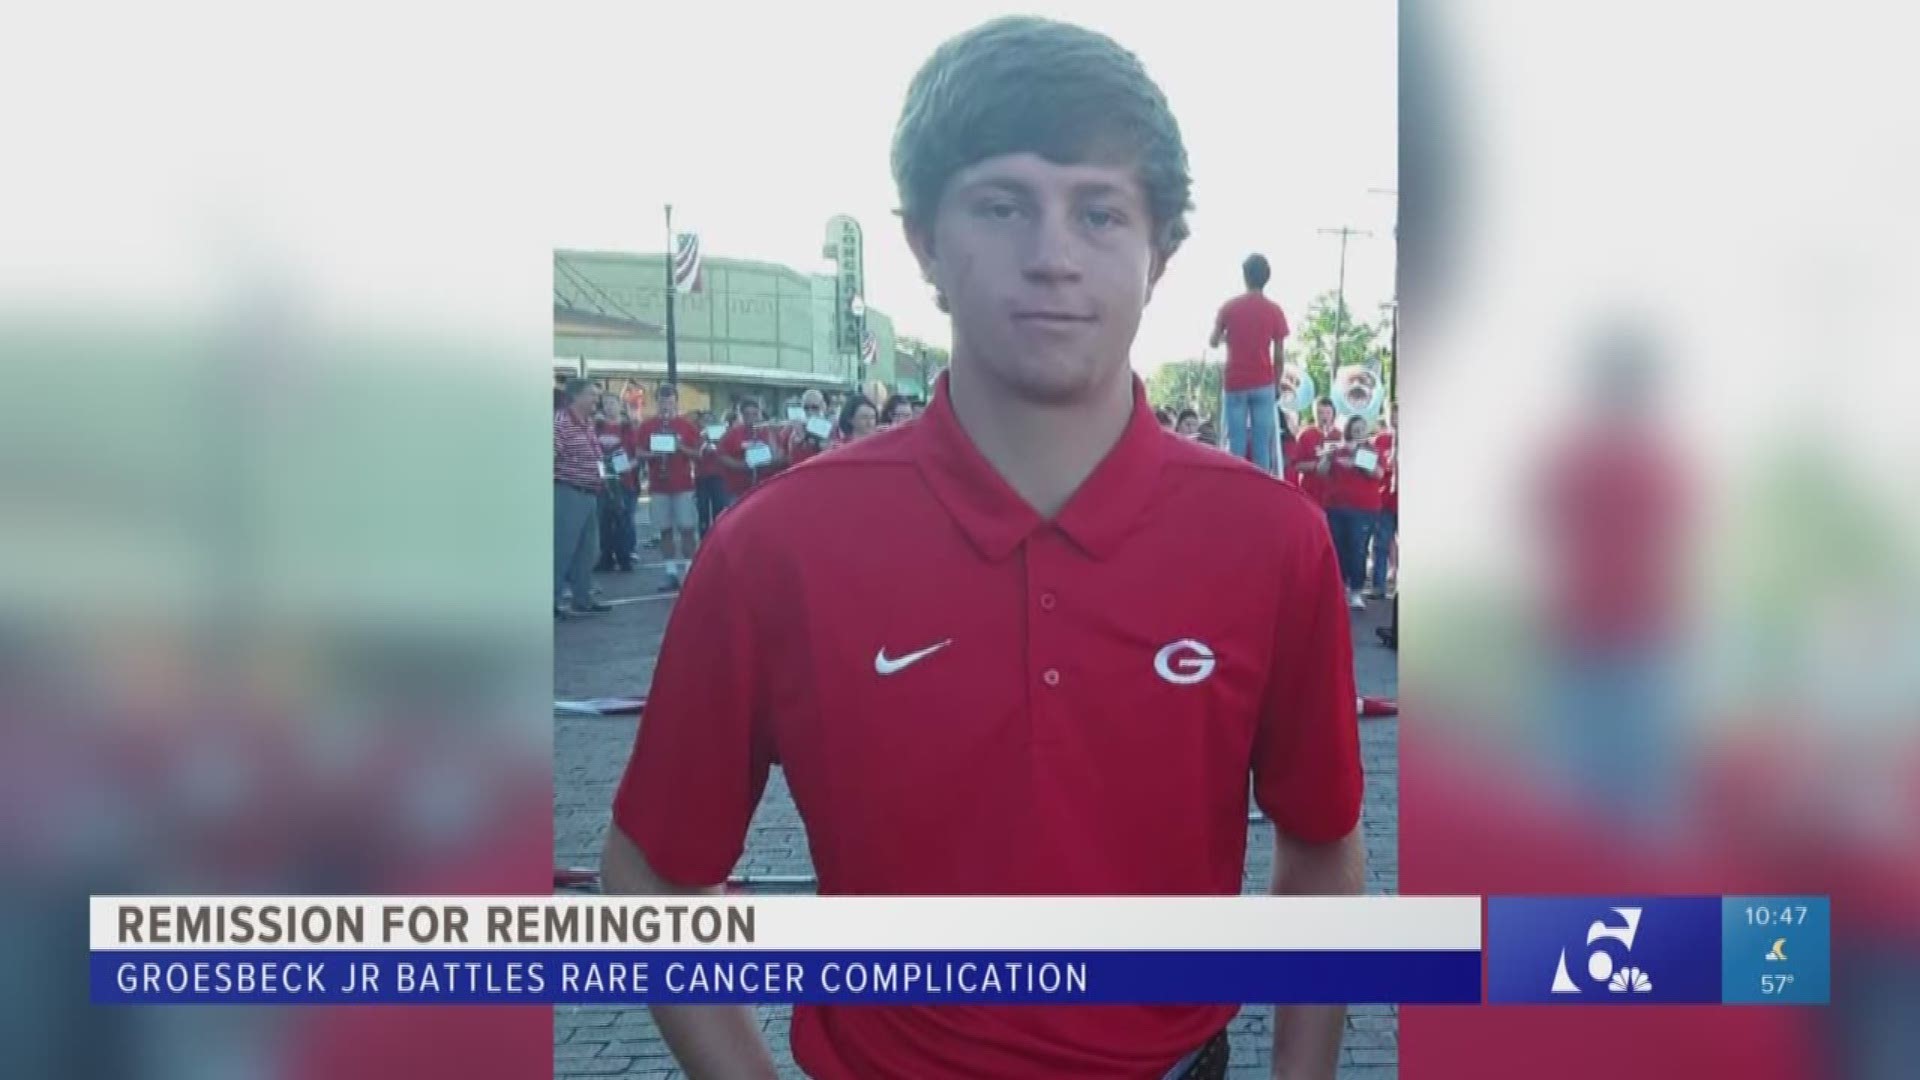 Remington Masters was living a normal life less than two months ago, but everything changed when he was faced with a serious, rare complication after being diagnosed with cancer.